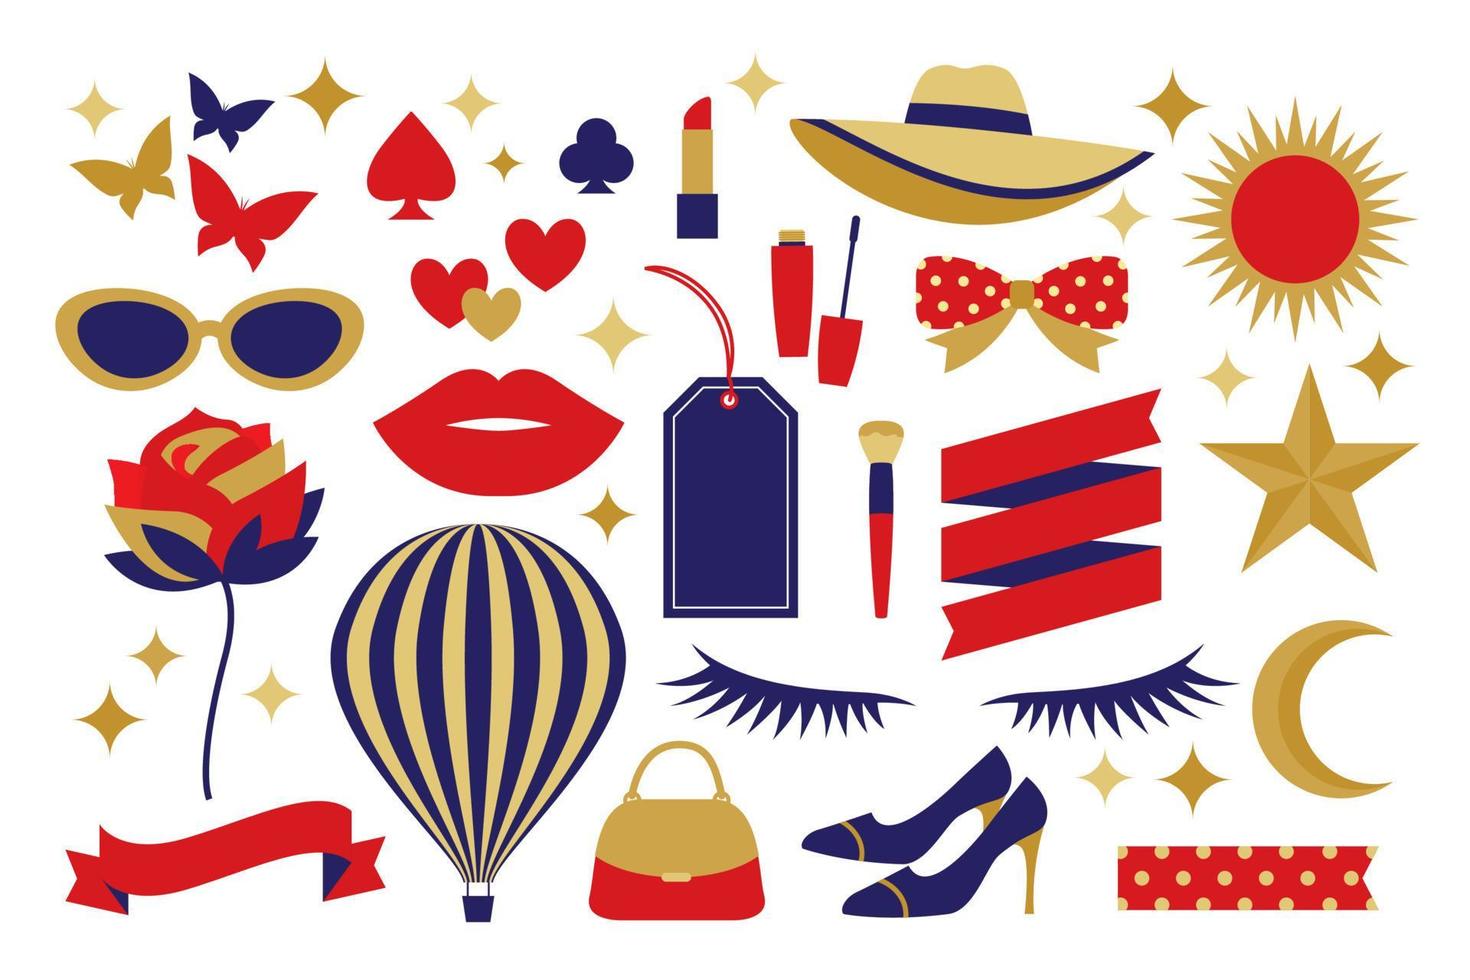 red gold and blue theme fashion stuff vector set for decorating your design project.